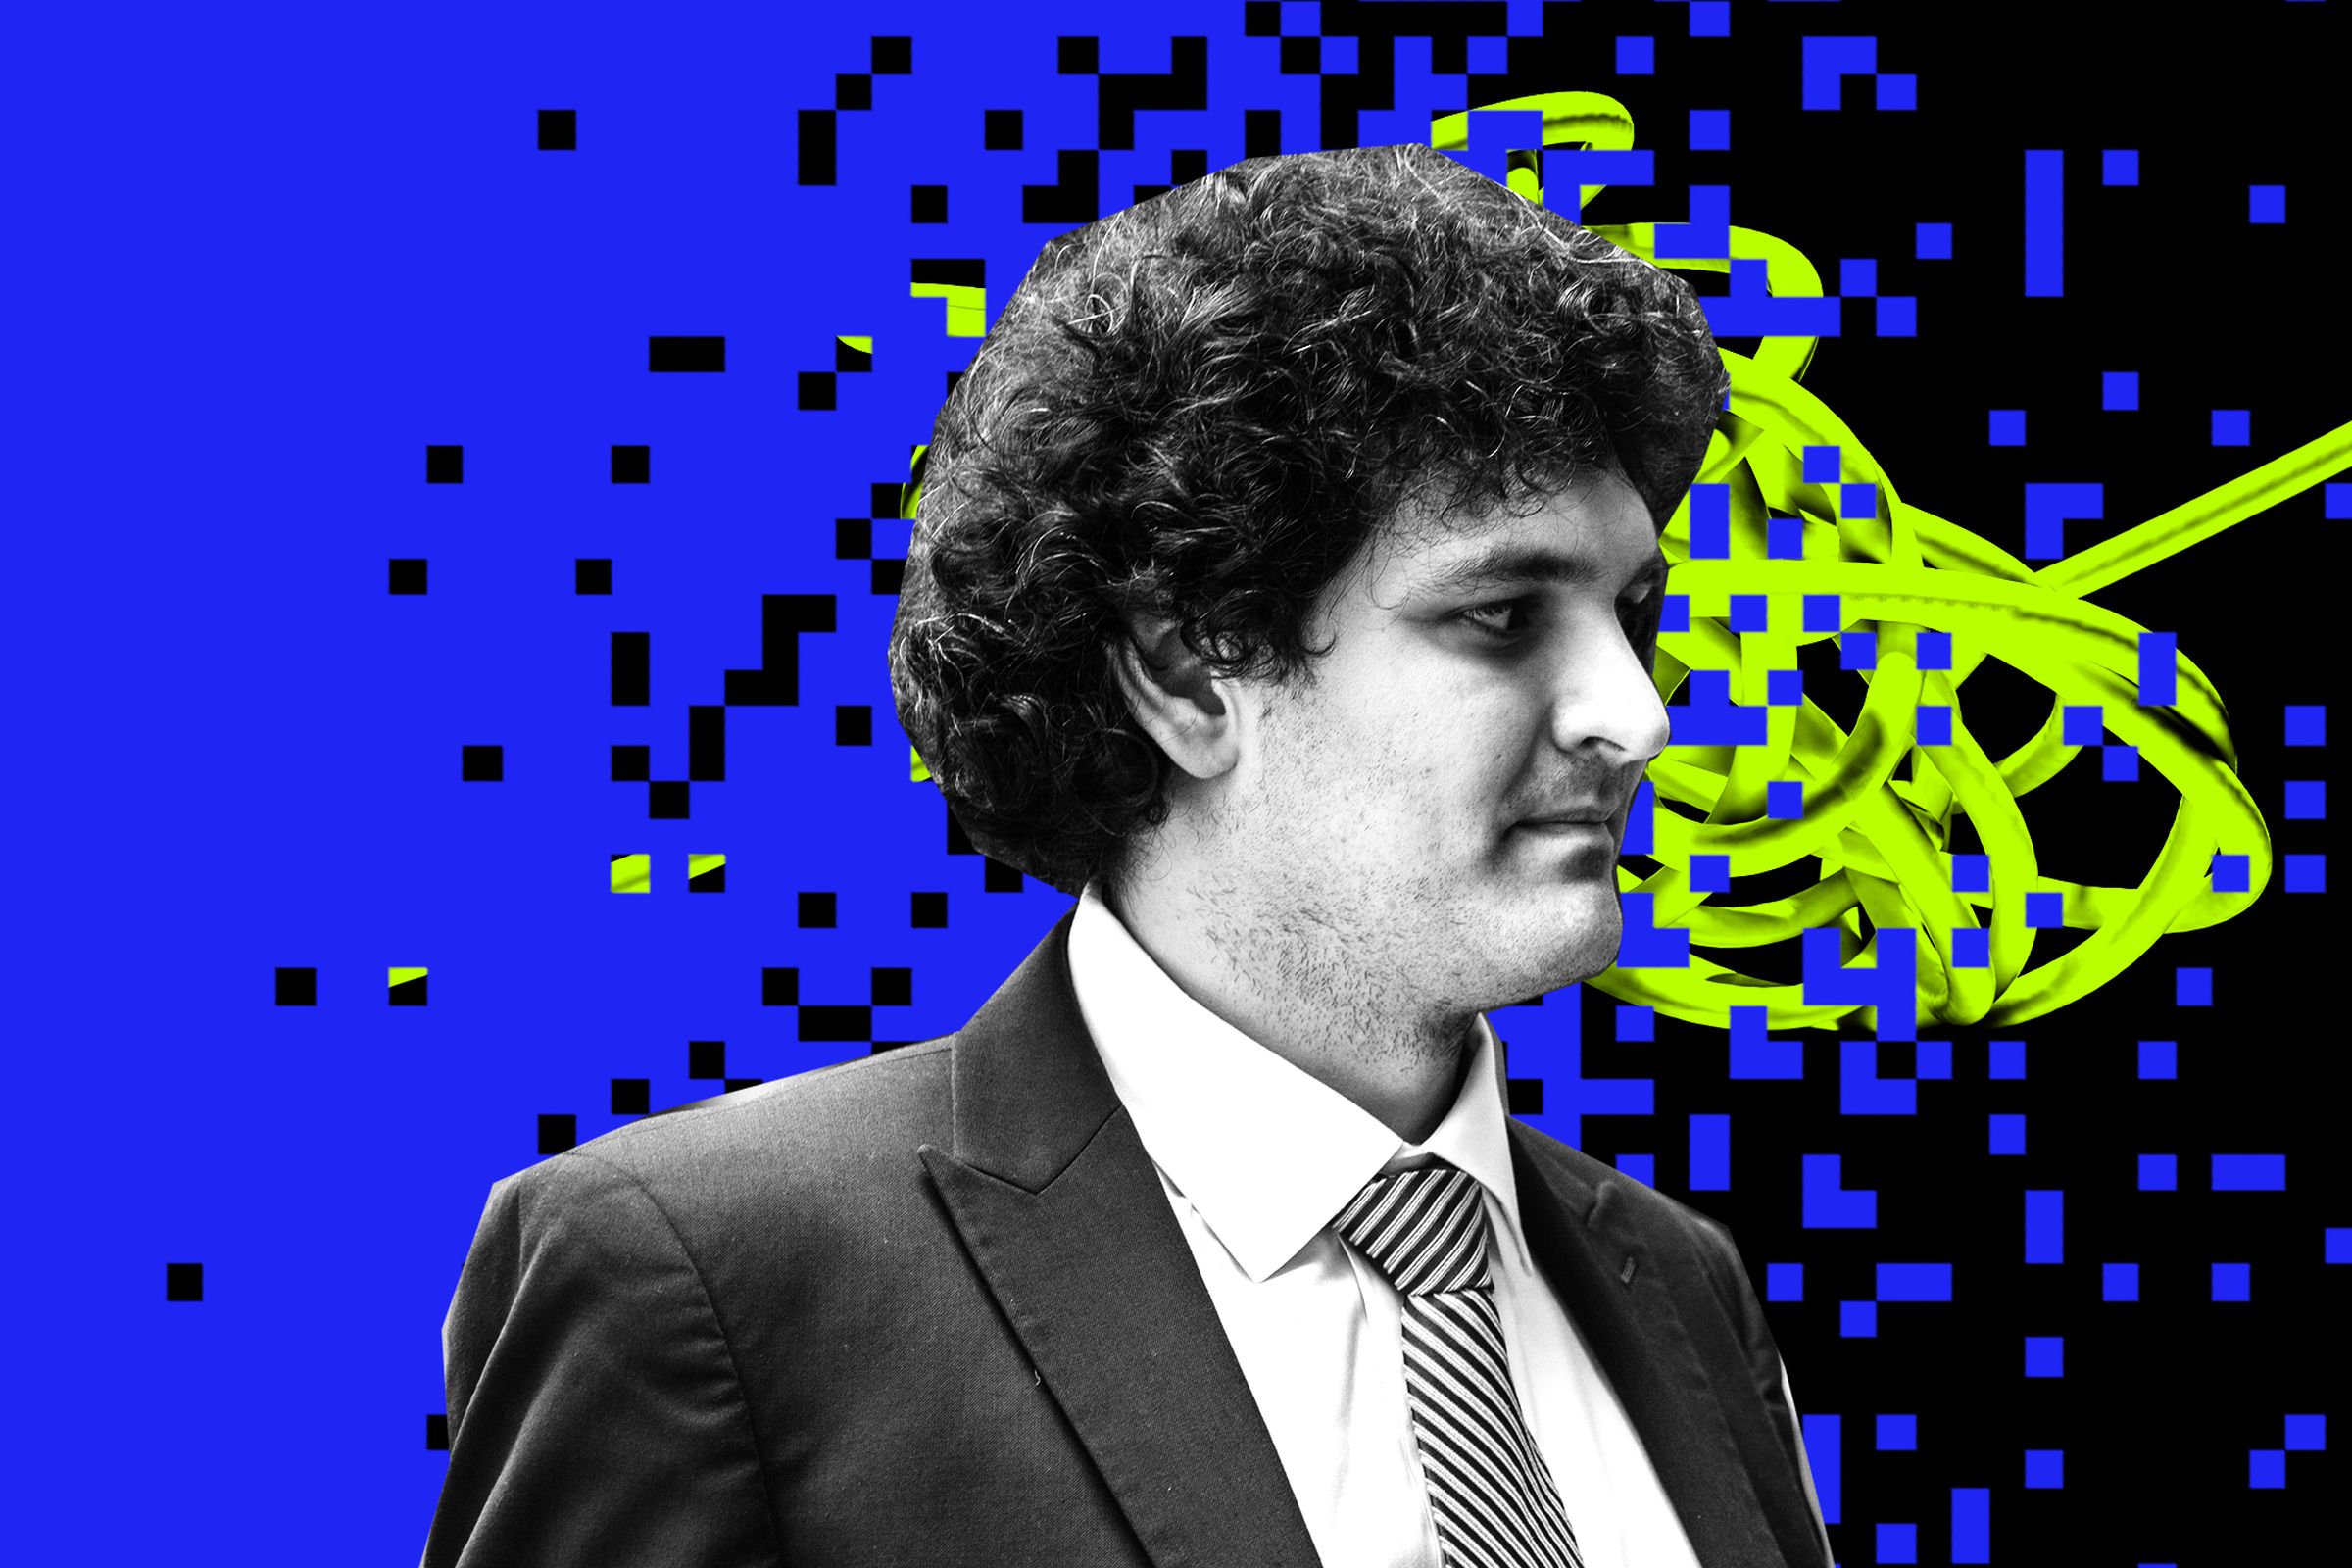 Photo illustration of Sam Bankman-Fried in front of a graphic background of pixels and a tangled wire.